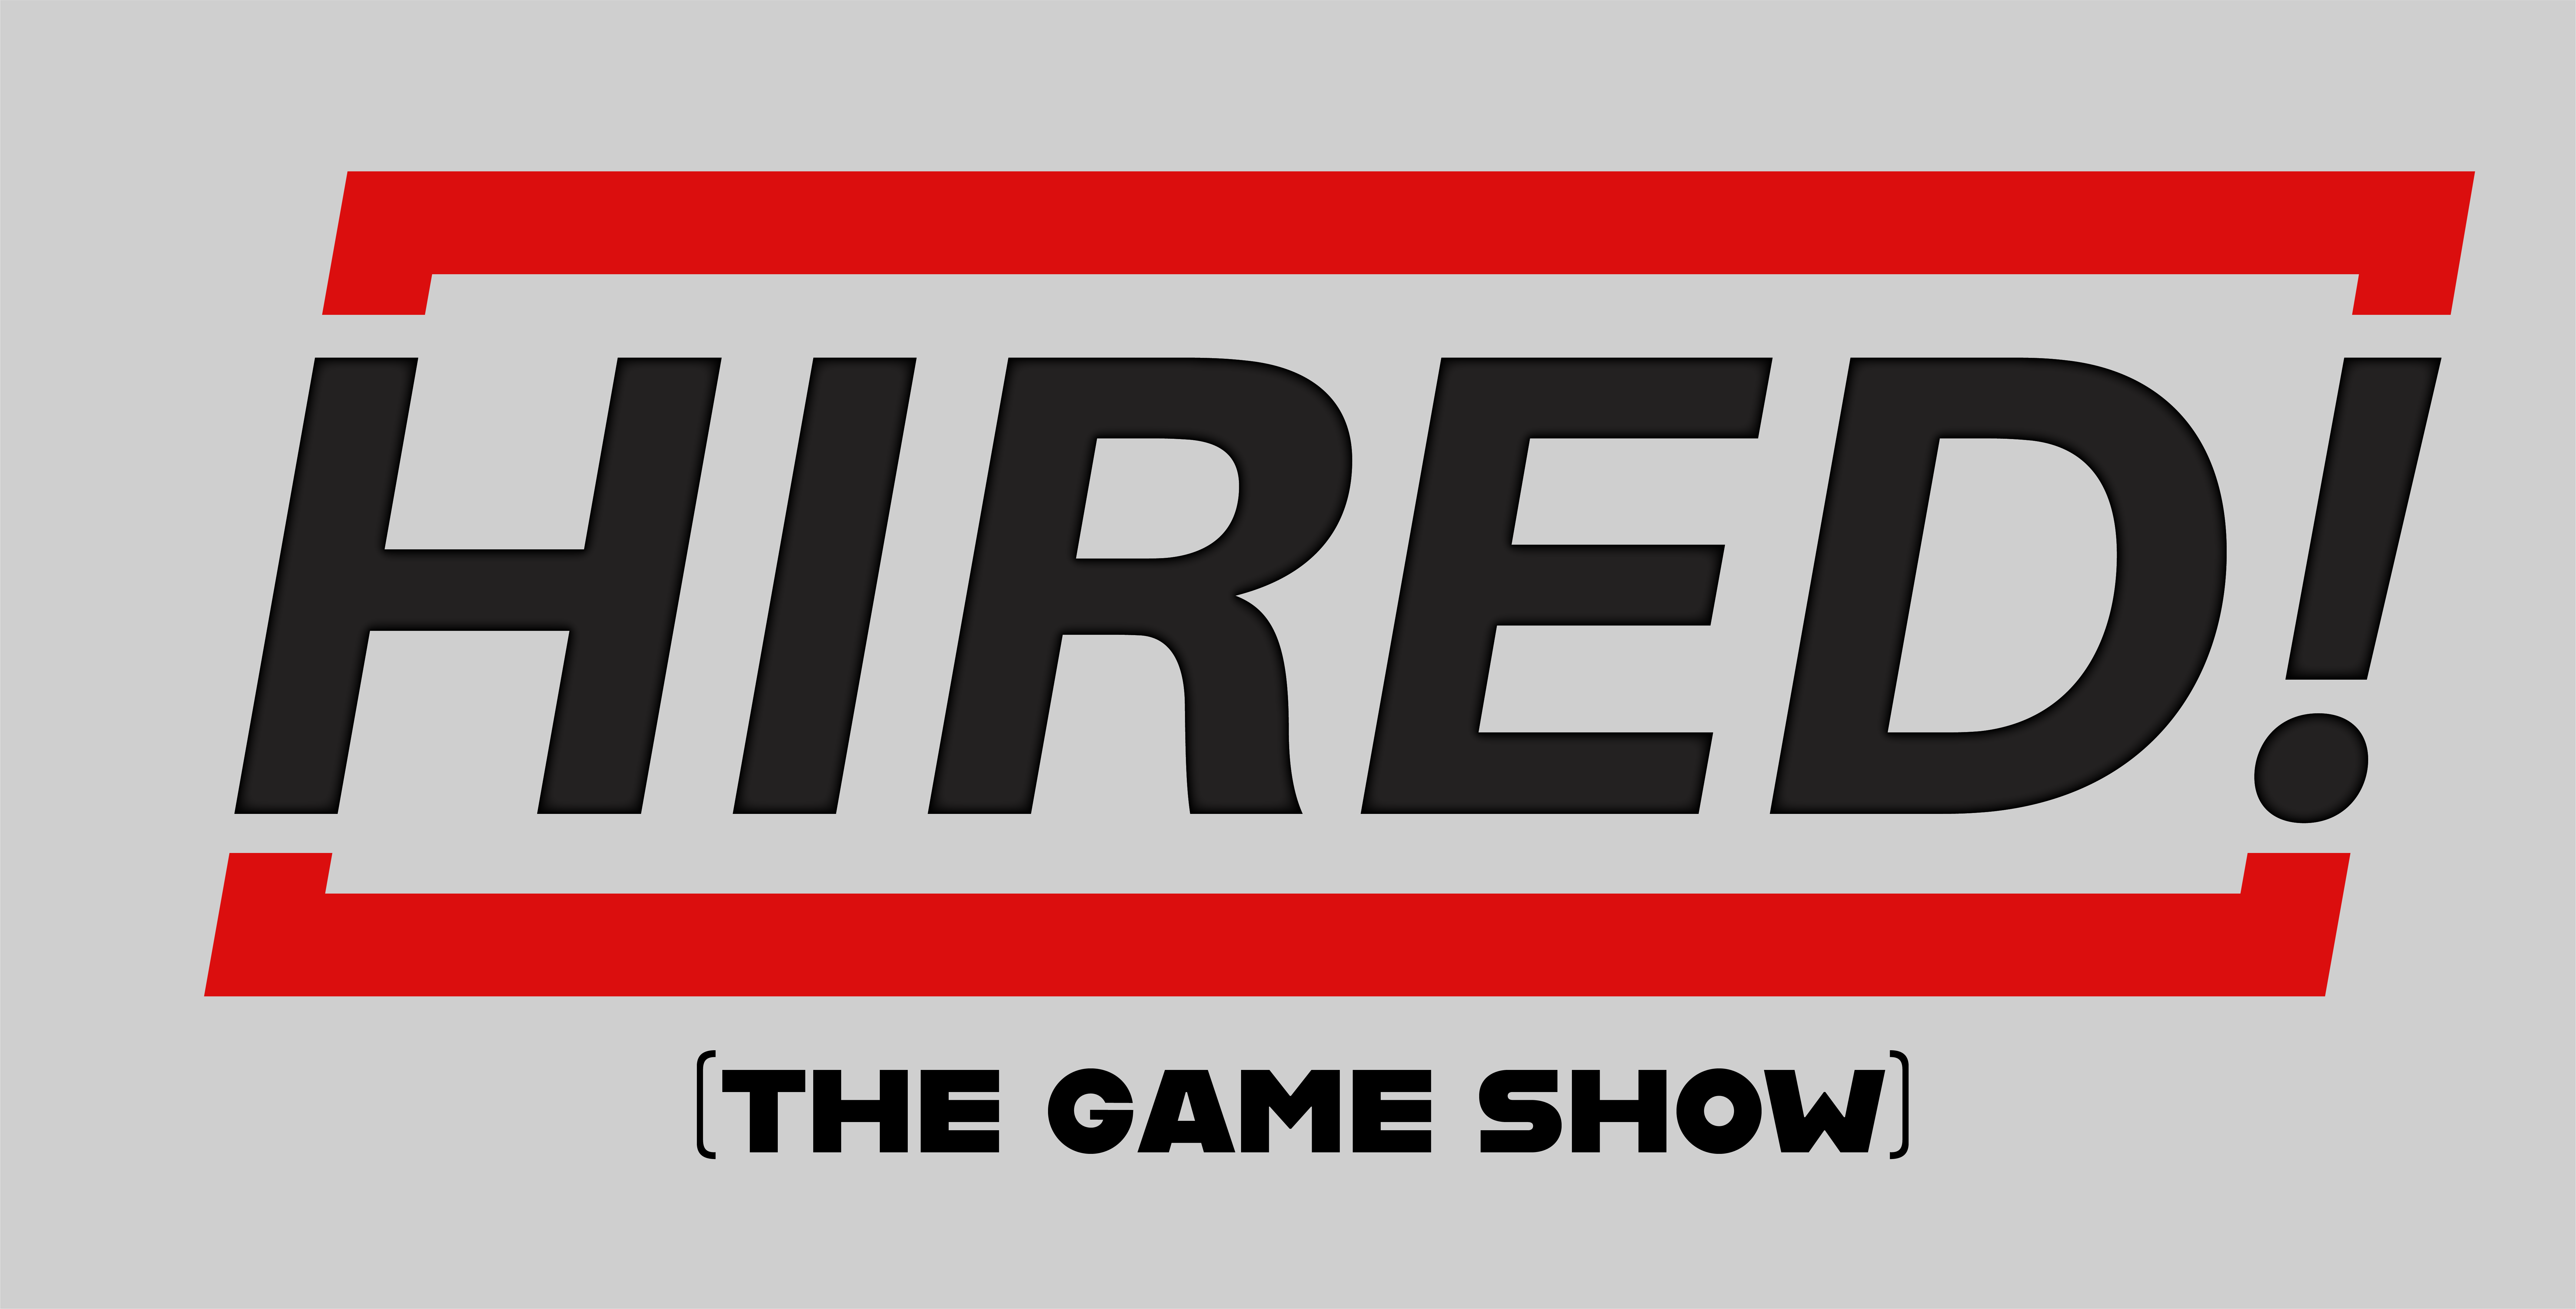 Hired! The Game Show logo in black lettering with a red rectangle around it.